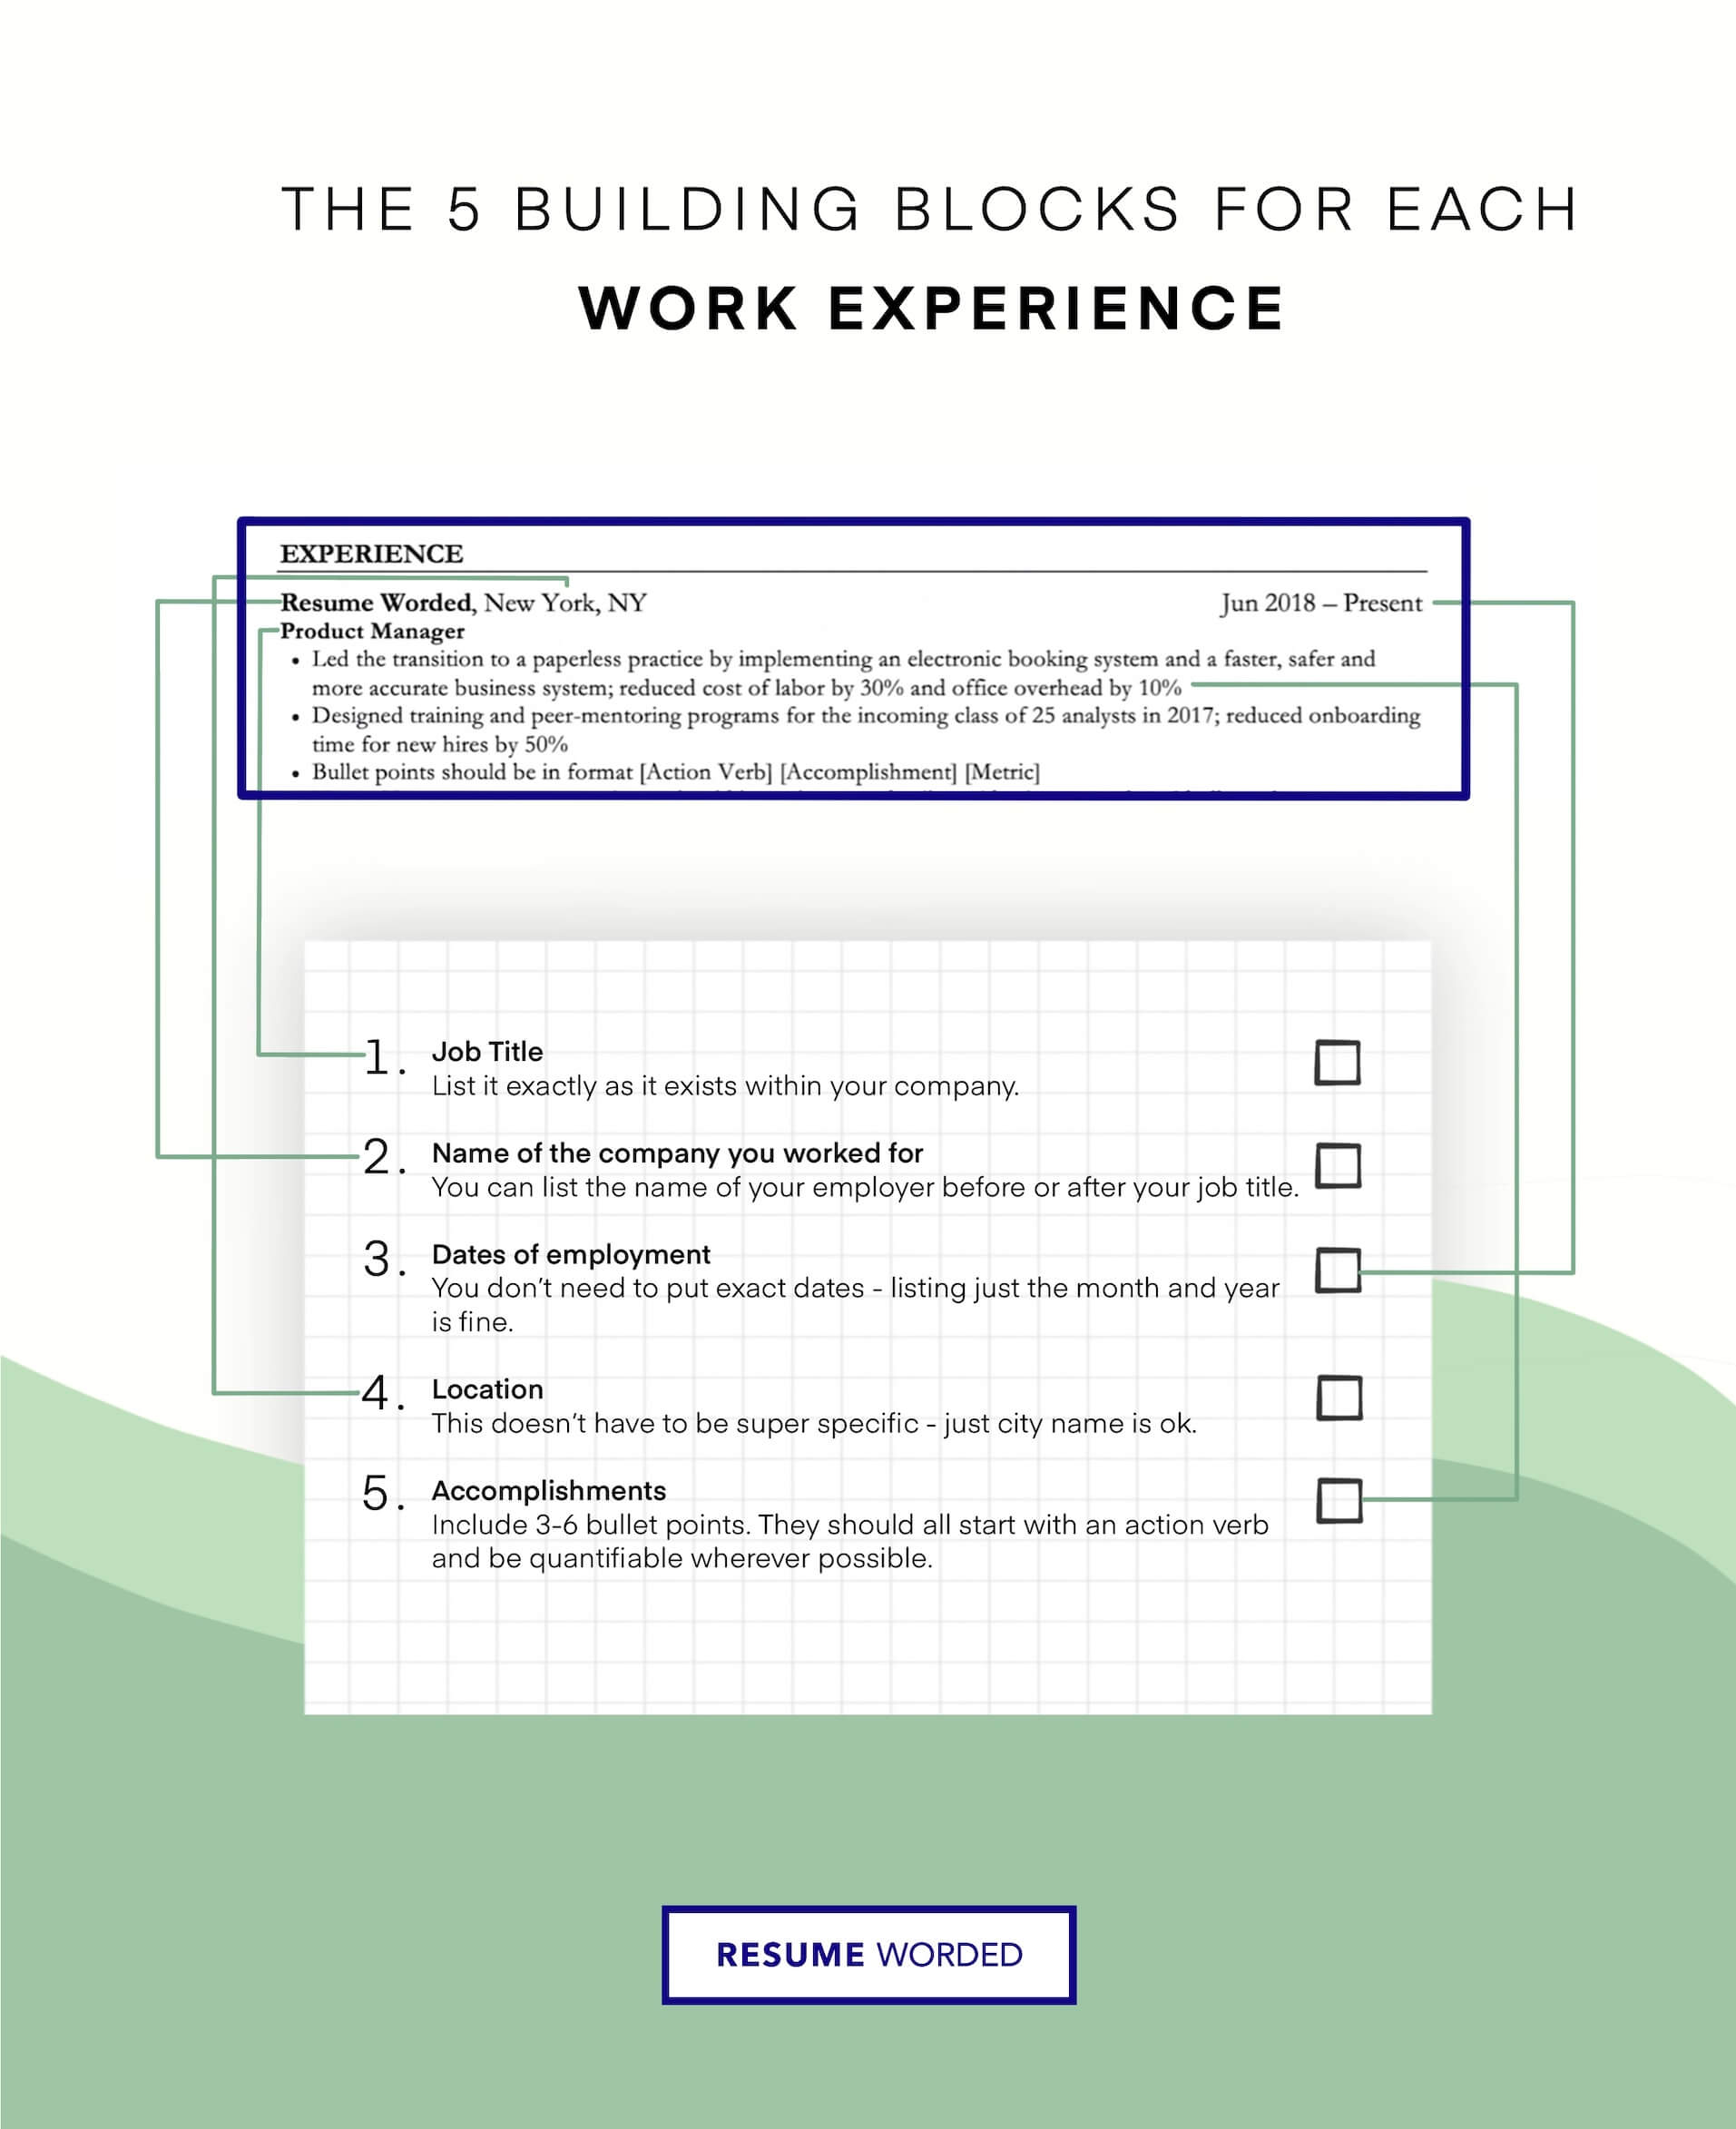 Show experience with the Agile process - Agile Product Owner CV